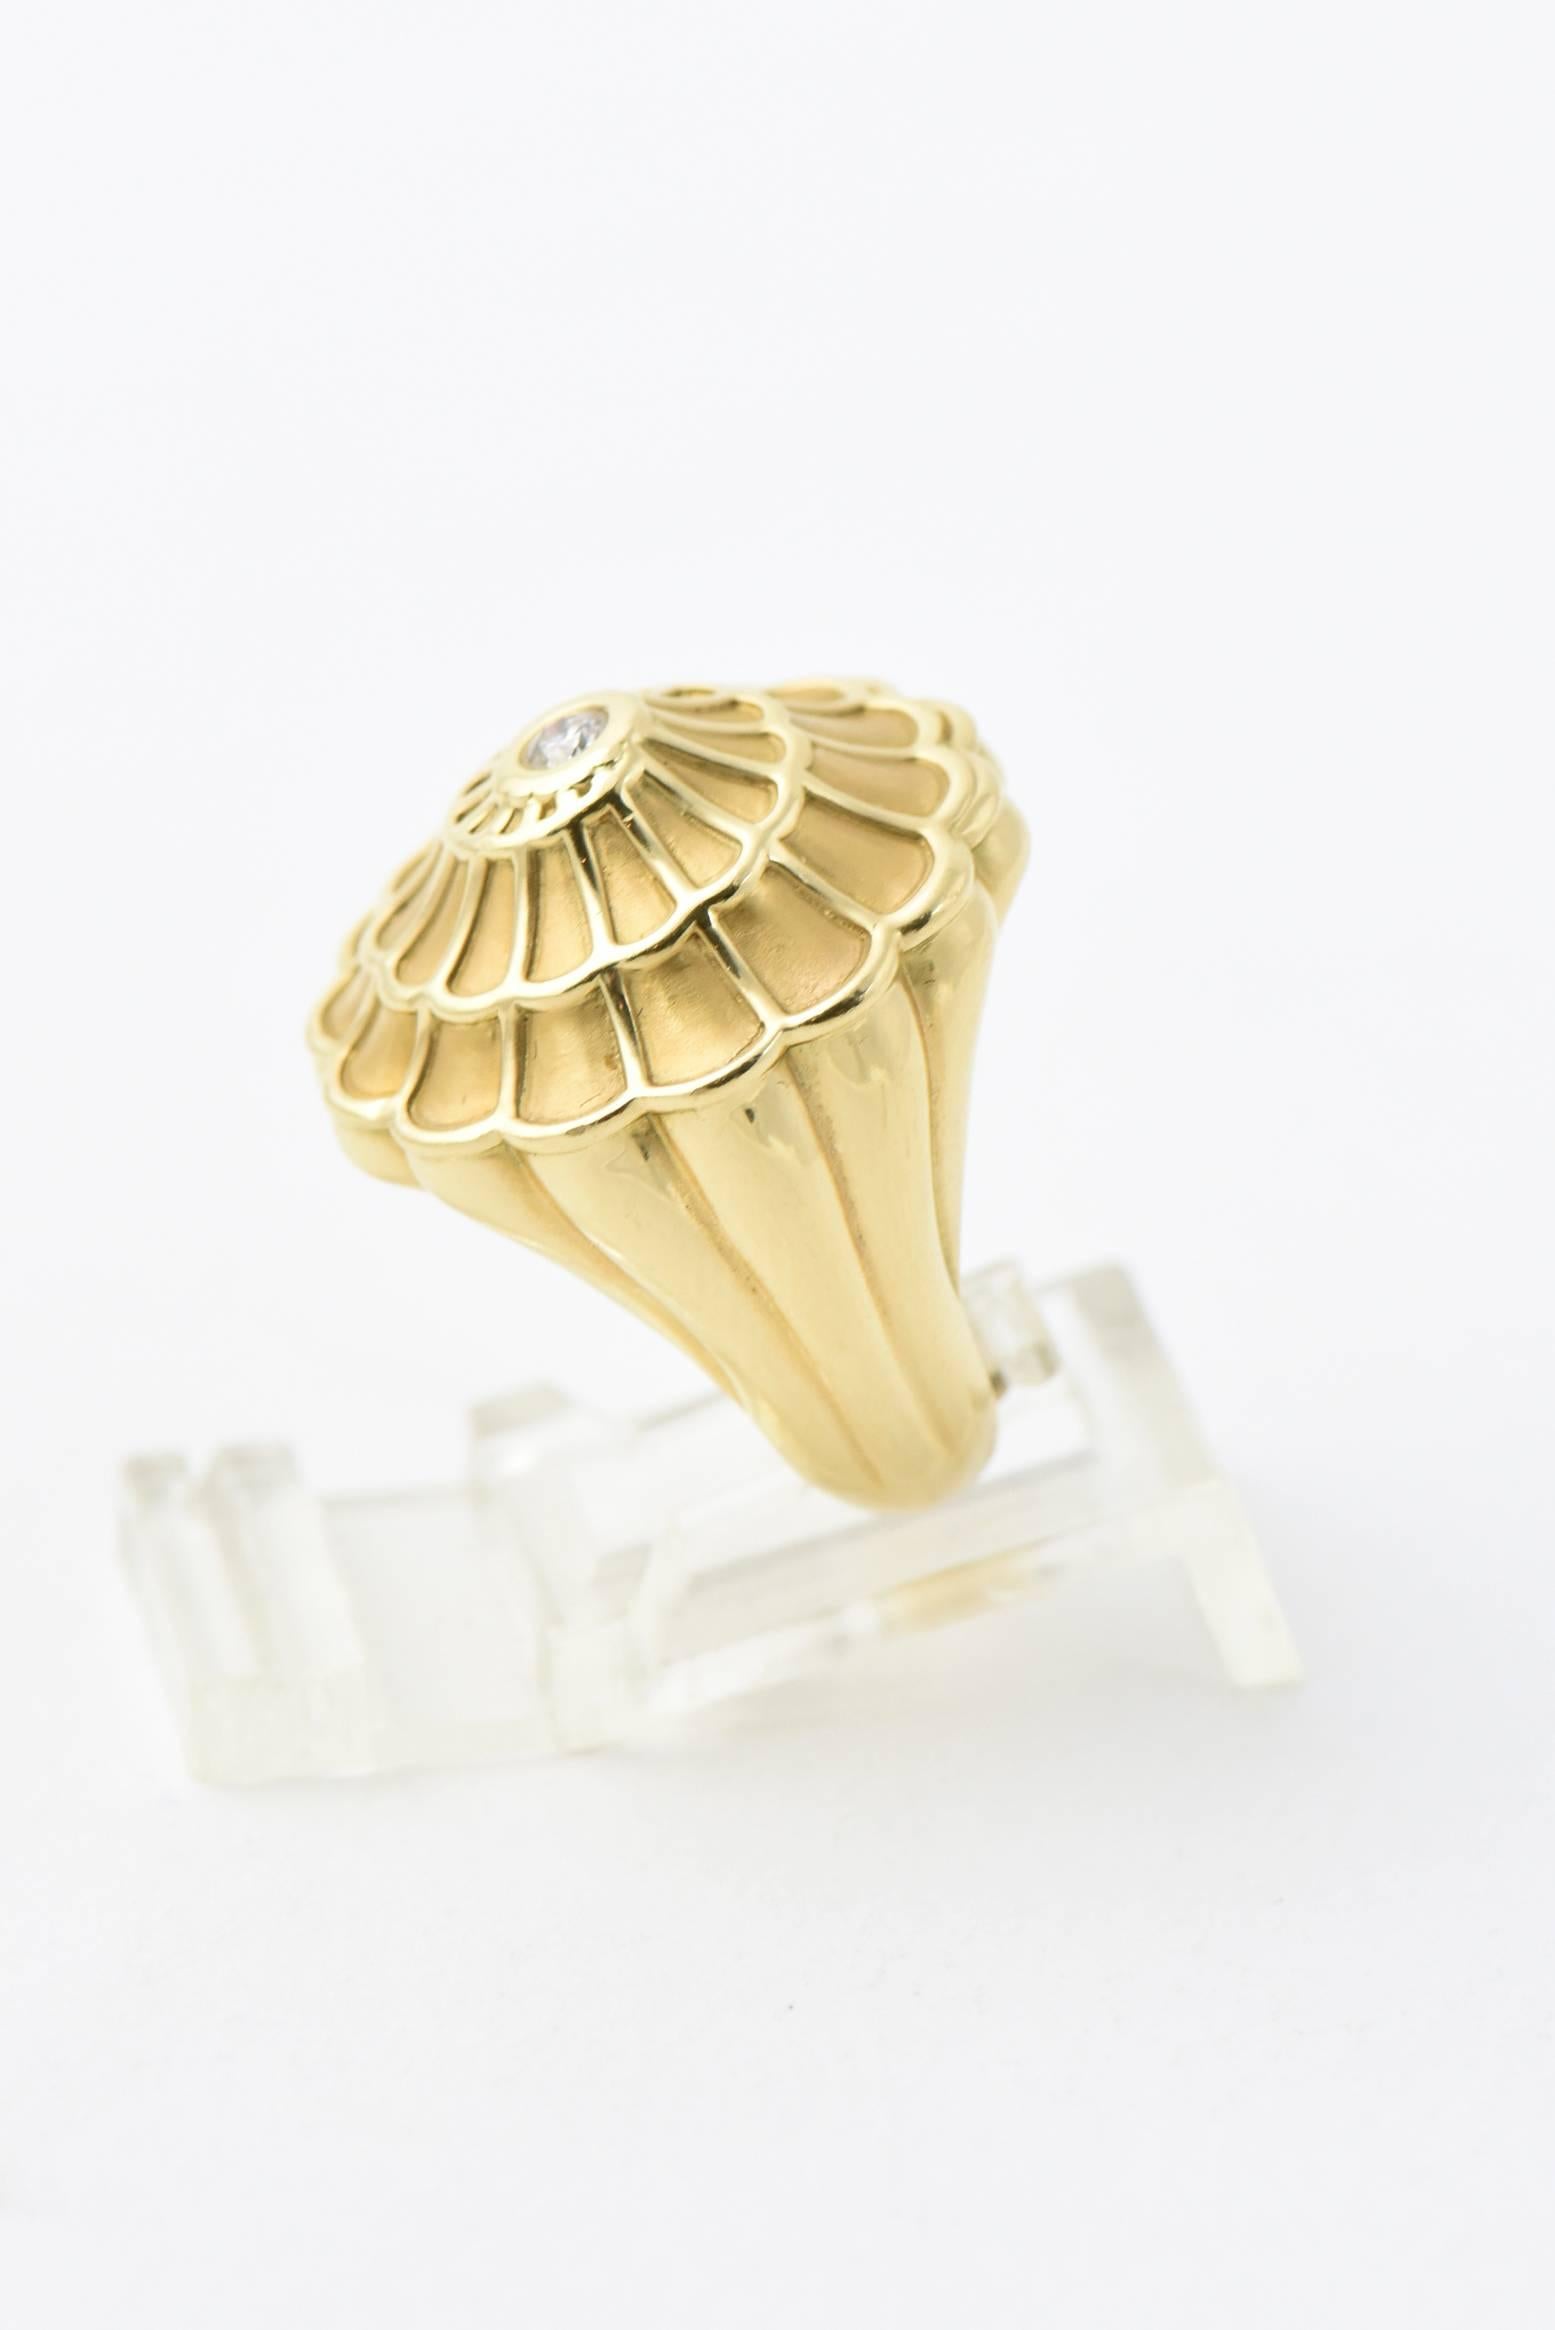 Round Cut Carrera y Carrera Afrodita Diamond and Gold Flower Cocktail Ring